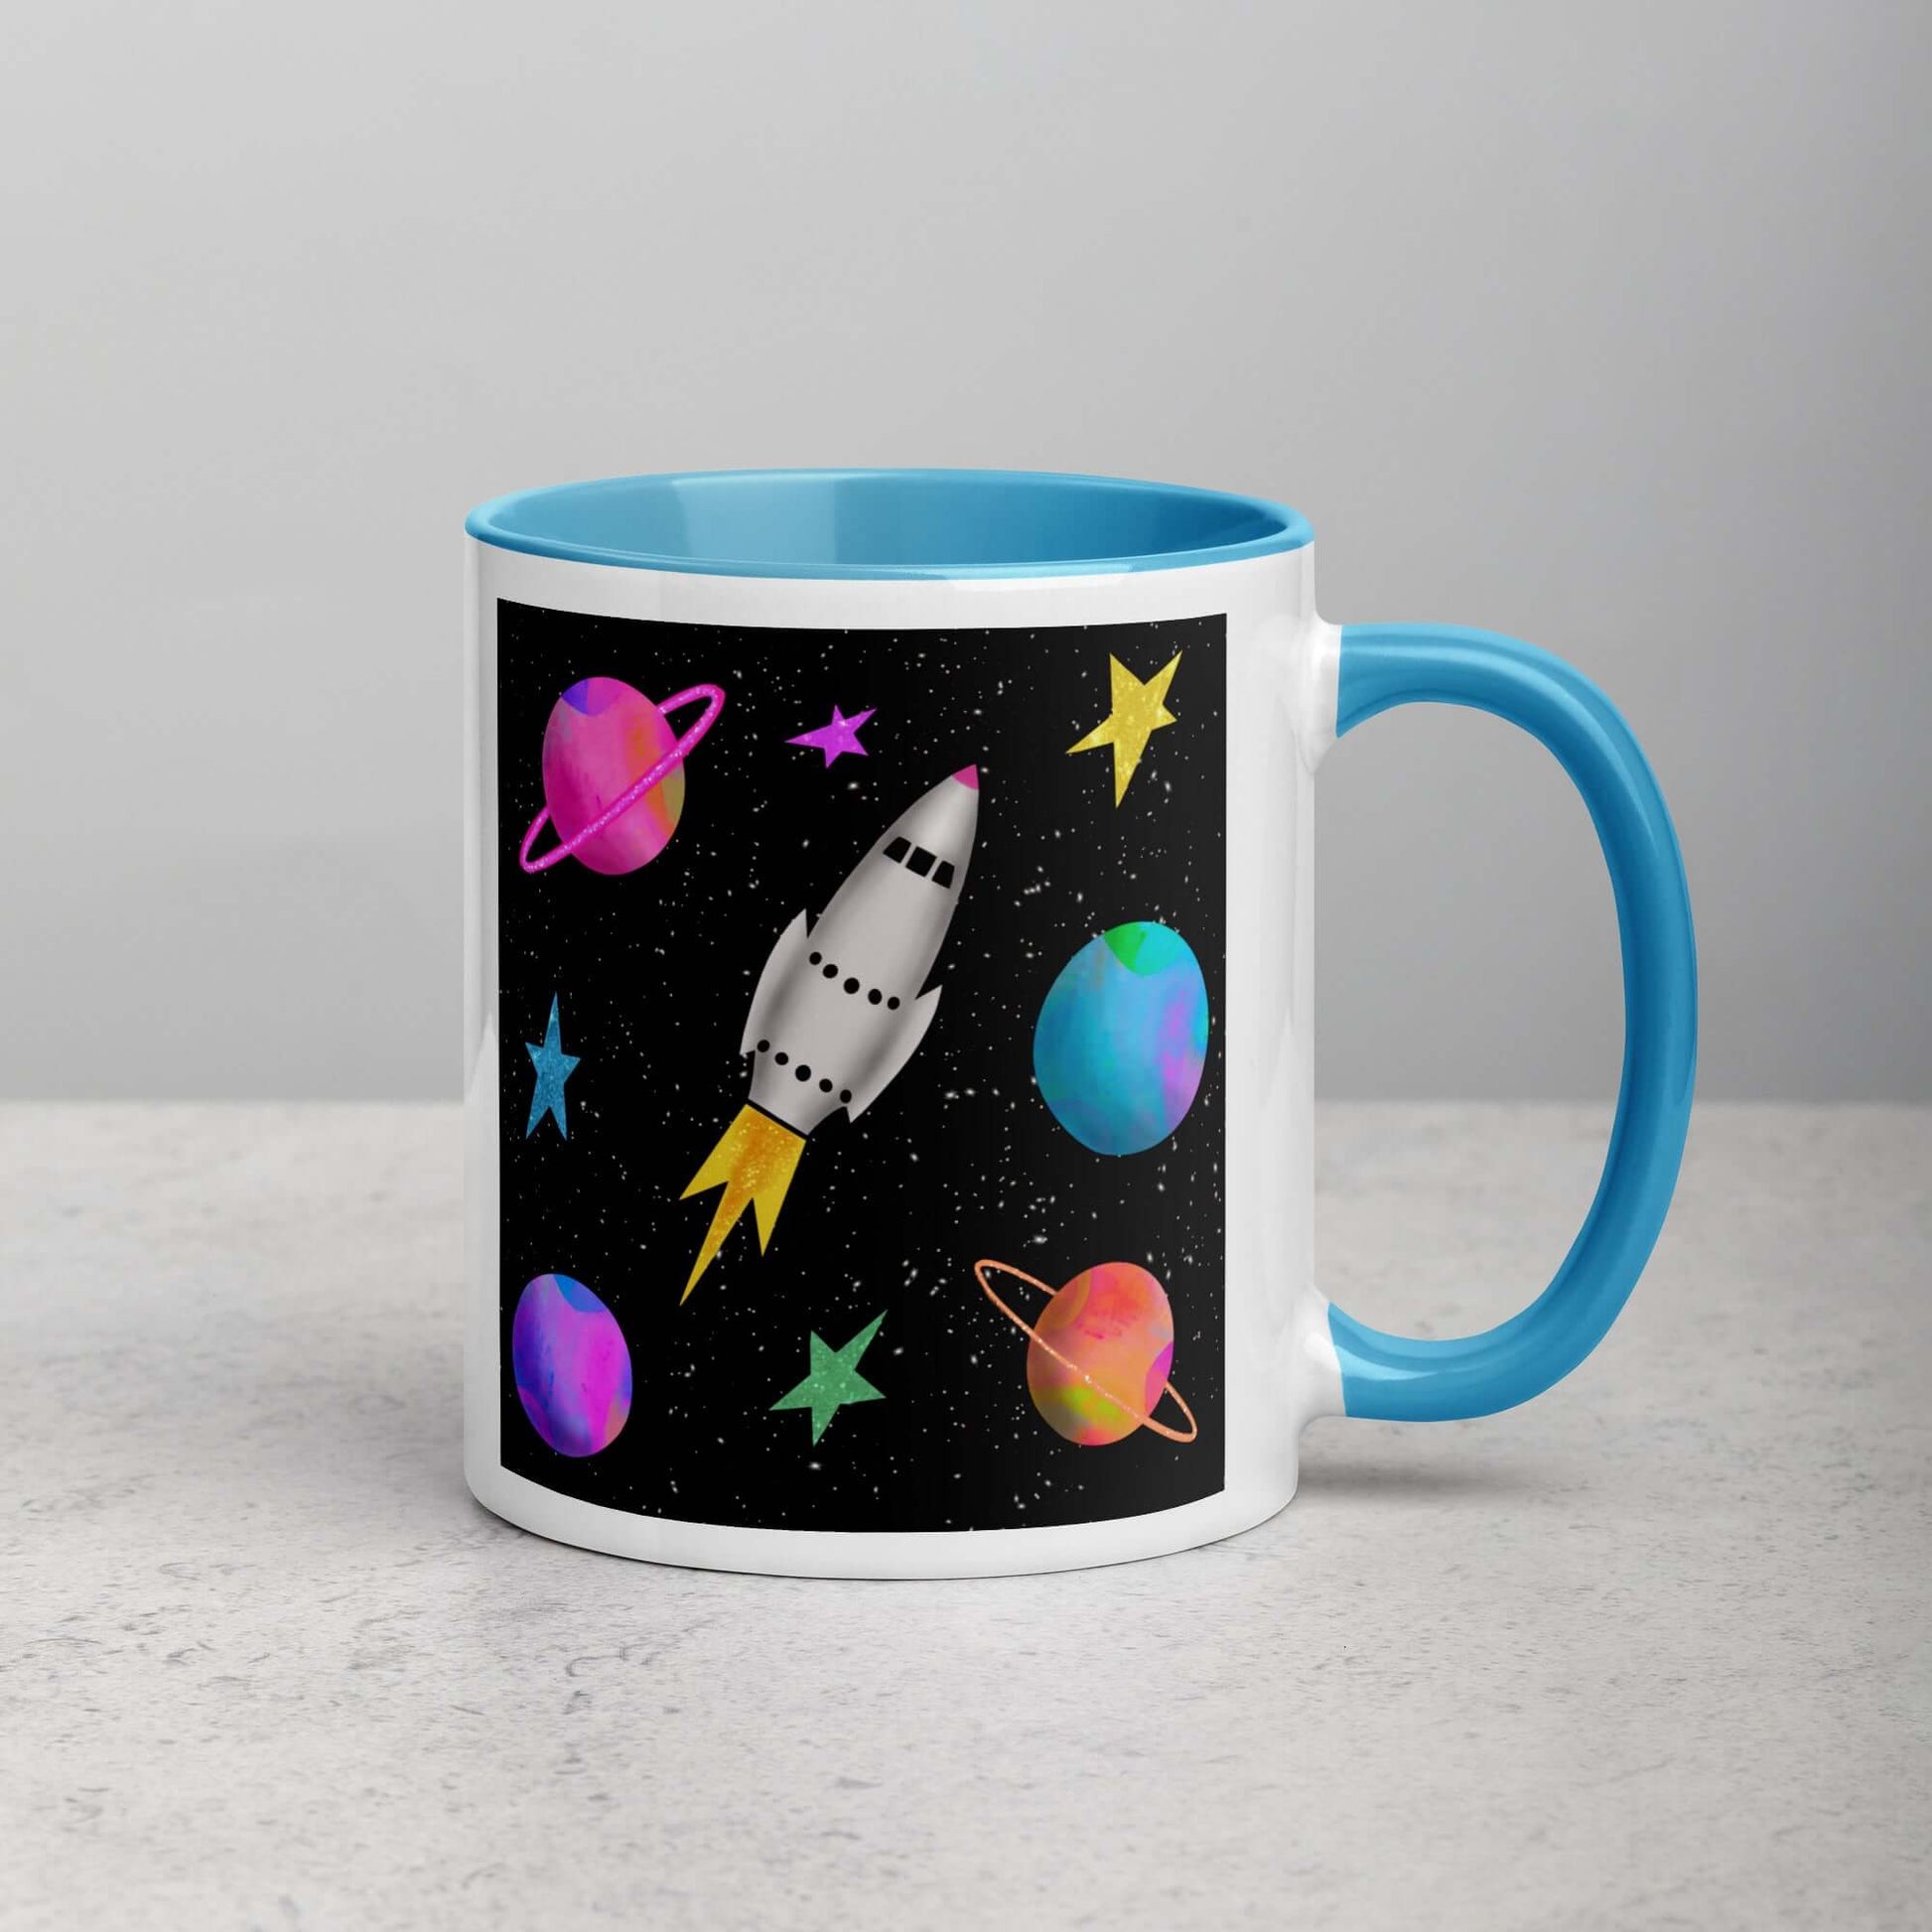 Whimsical Space Rocket with Colorful Planets and Stars on Black Background “Space Rockets” Mug with Light Blue Color Inside Right Handed Front View